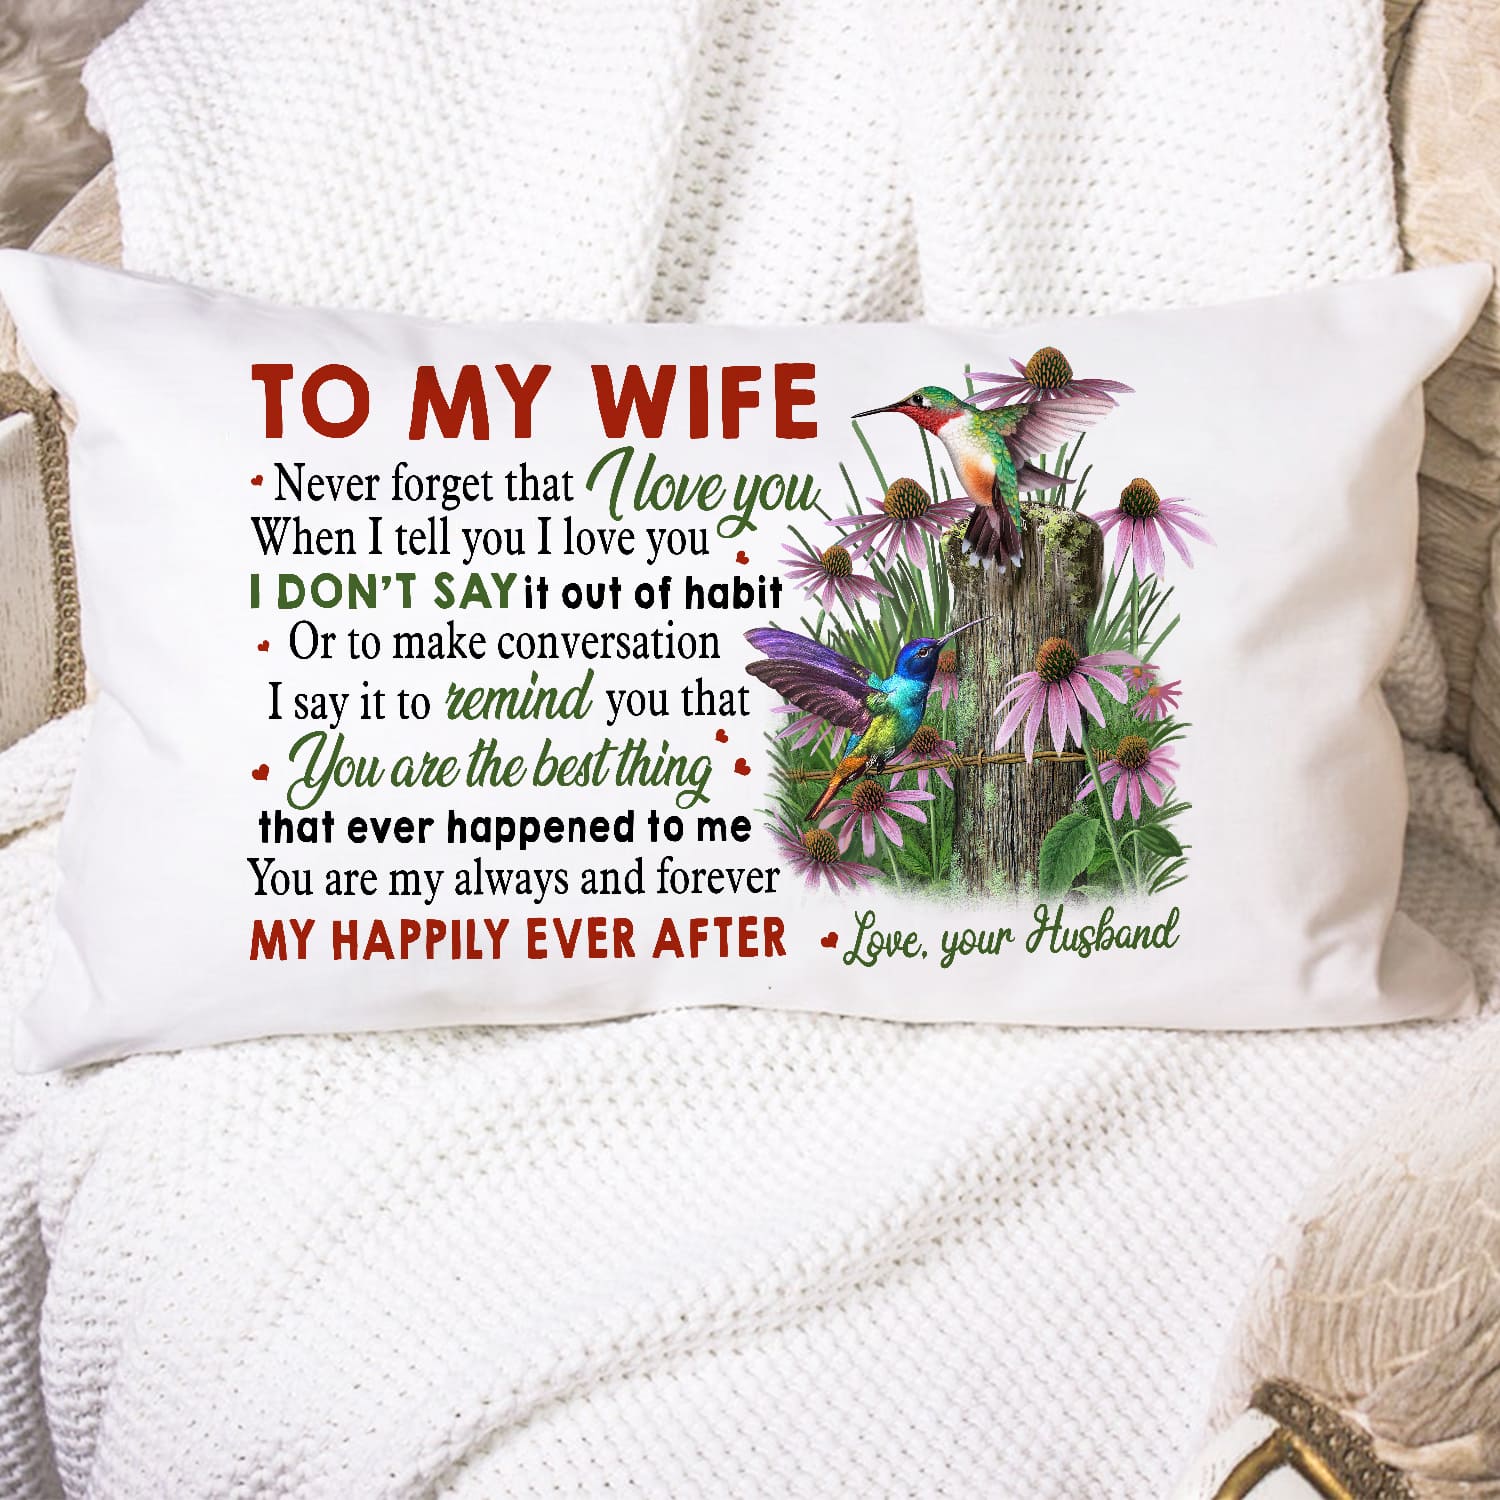 To my wife - Hummingbird - You're the best thing that ever happened to me - Couple Pillow